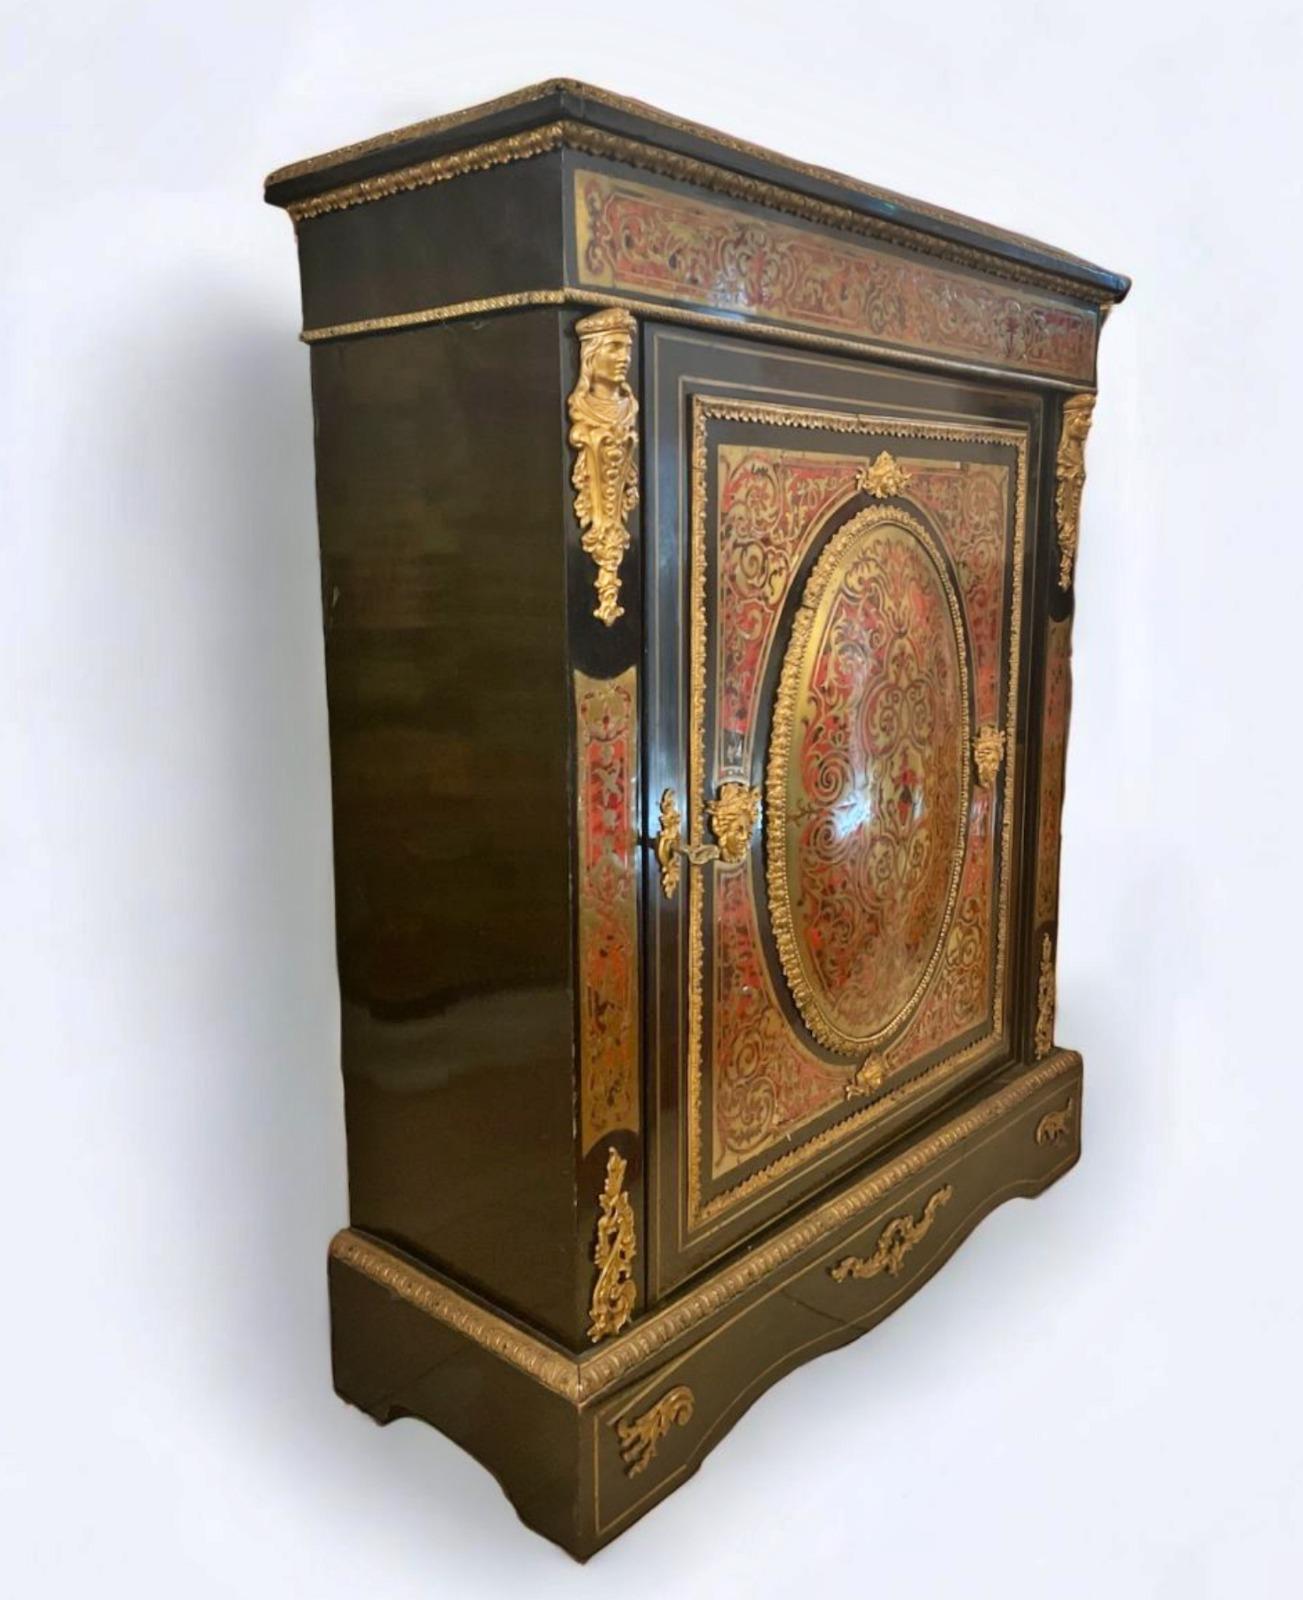 Napoleon III sideboard 19th Century
113 x 90 x 37 cm
with ebonized wood door and brass inlays, gilded bronze applications.
Upper floor with character.
French manufacture, Napoleon III period
good conditions